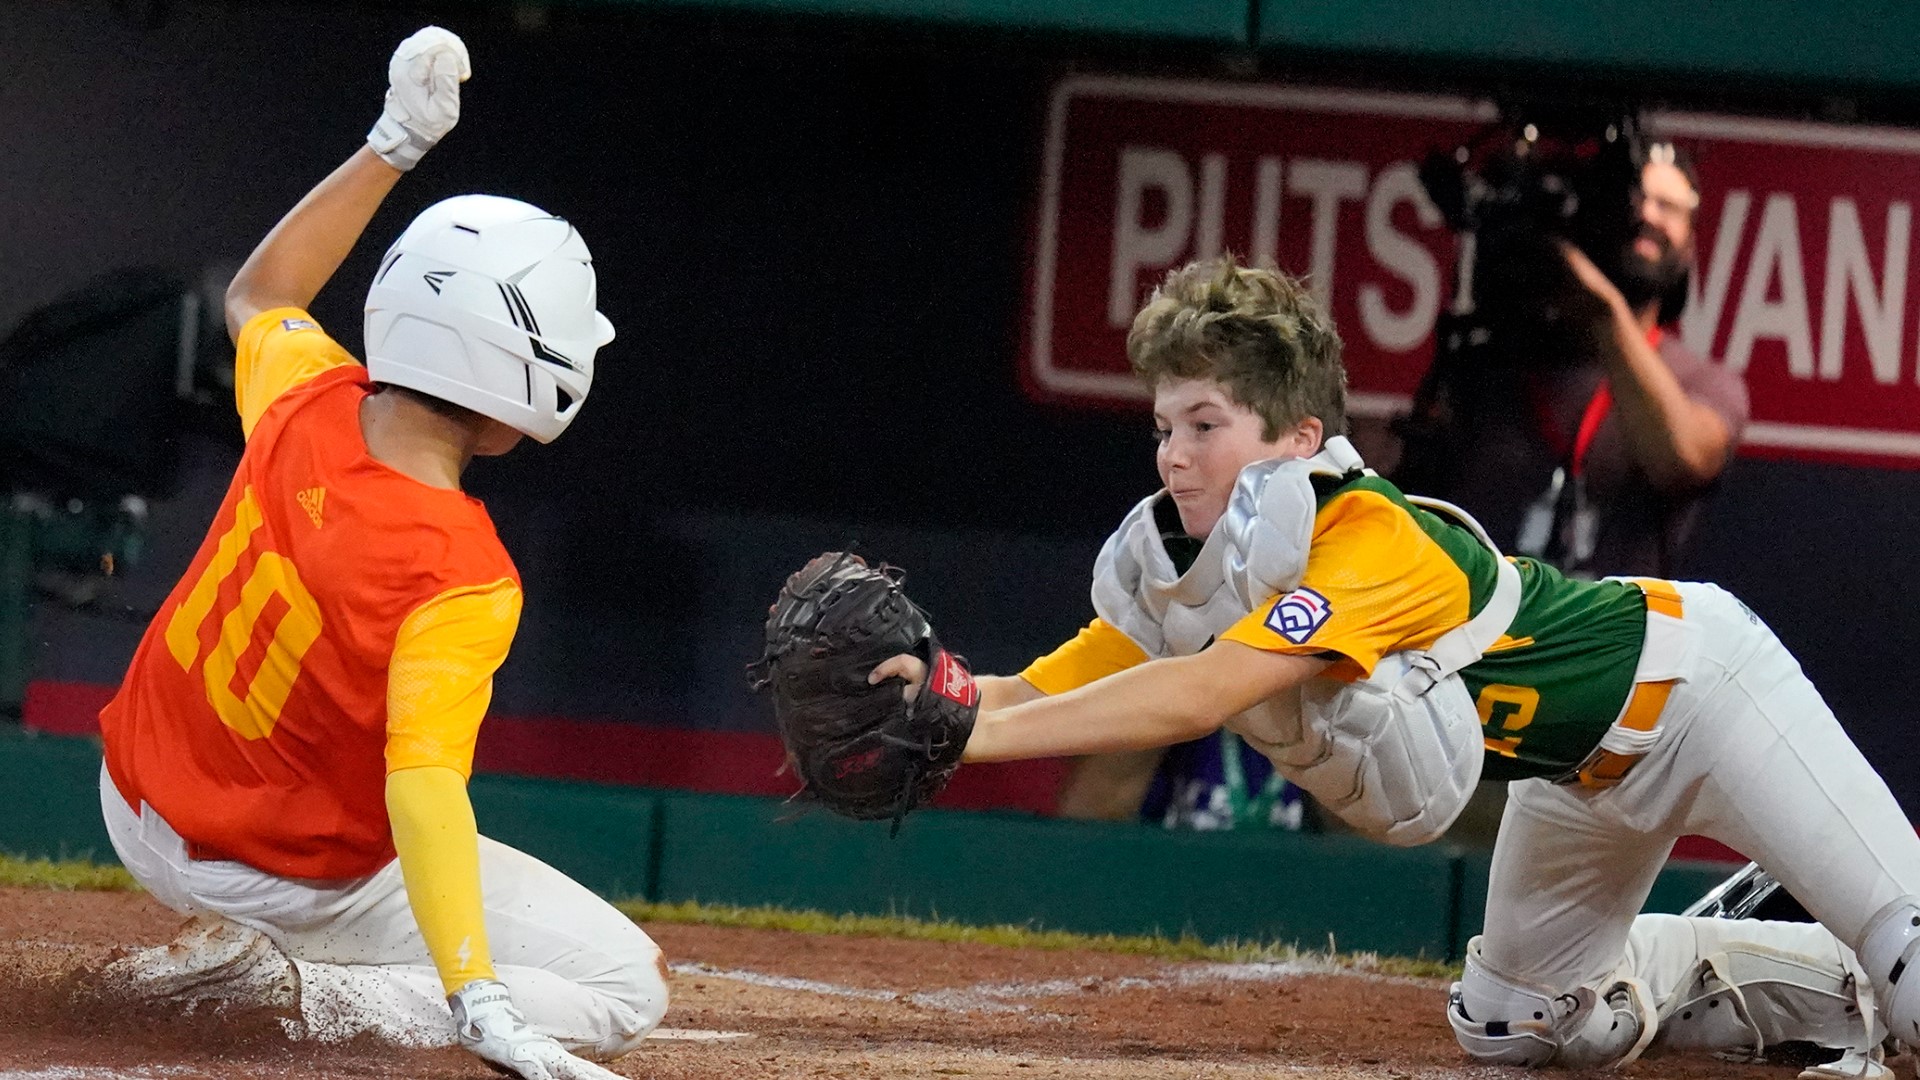 The Iowa boys were unable to score against their Pearland, Texas opponents and were knocked out of the Little League World Series Top 6 Tuesday evening.